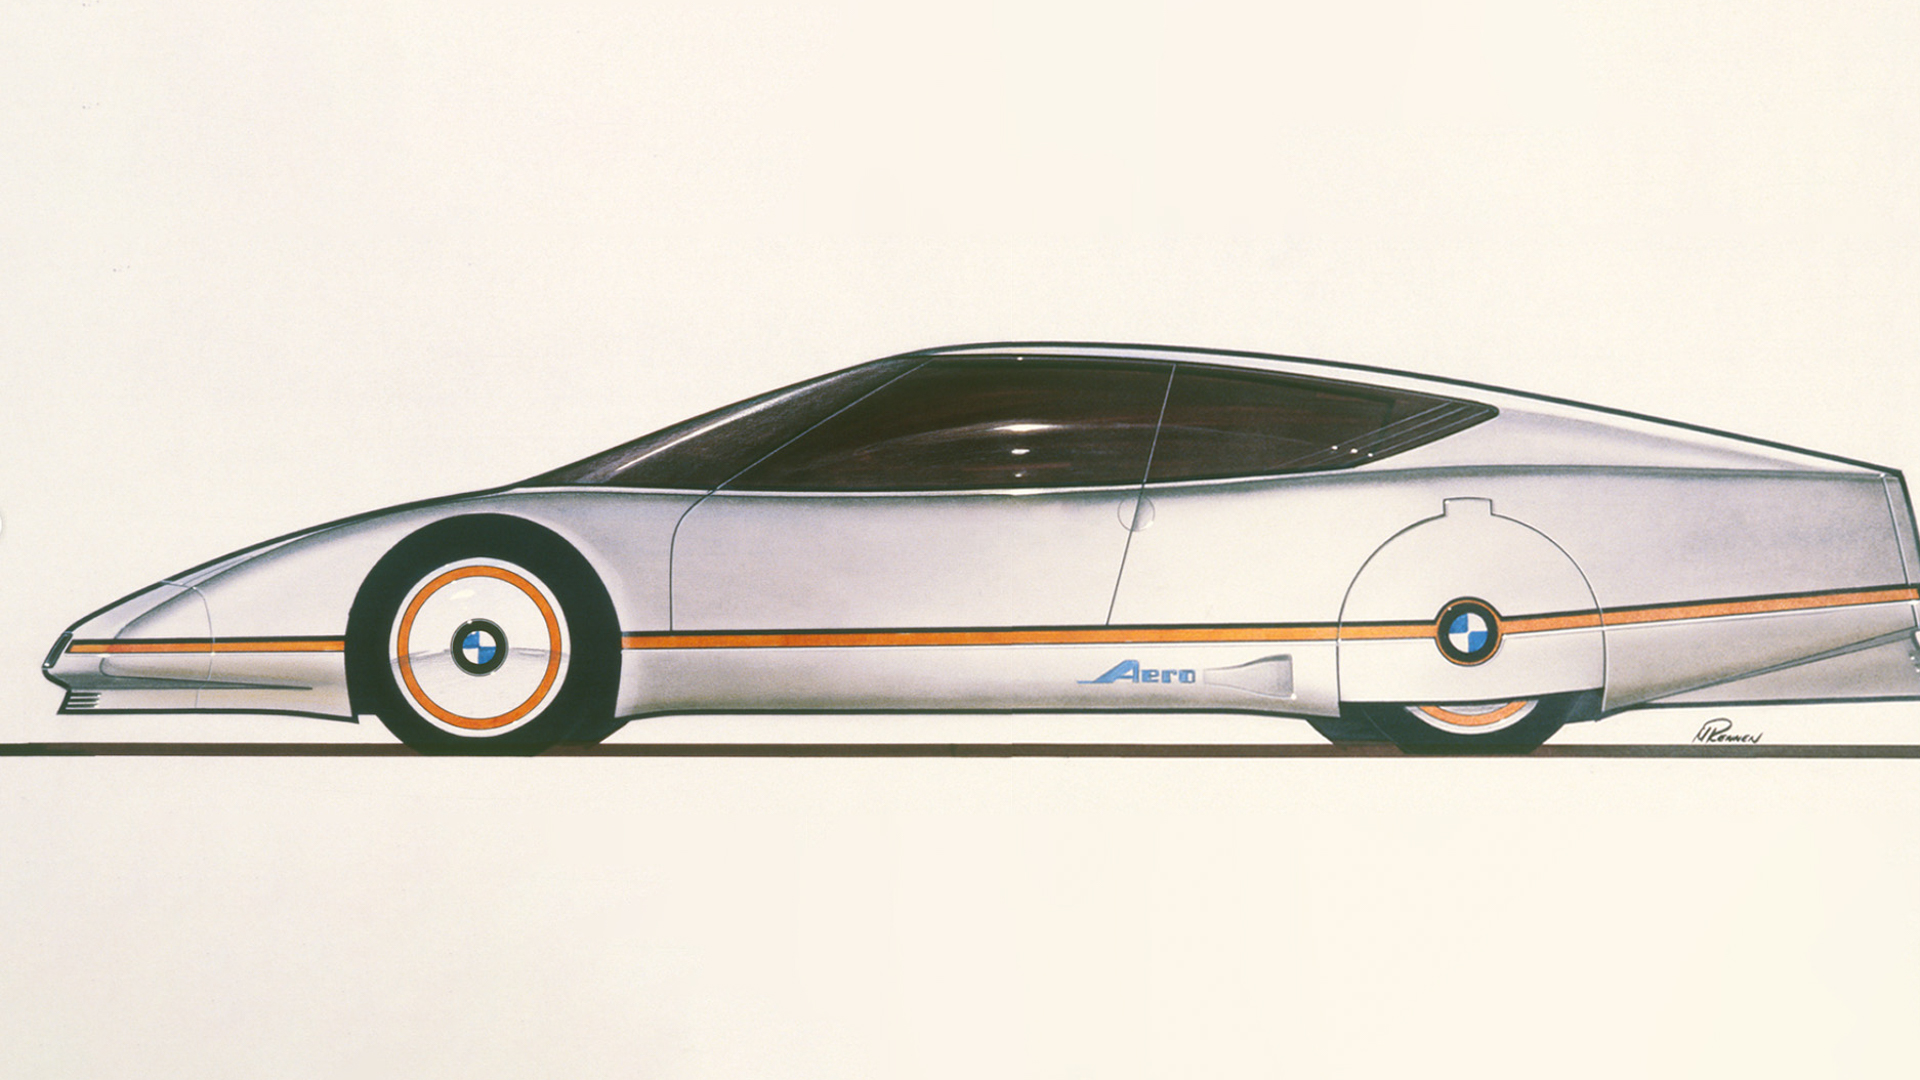 This Futuristic BMW Prototype Was Shaped in a Wind Tunnel Back in the ’80s